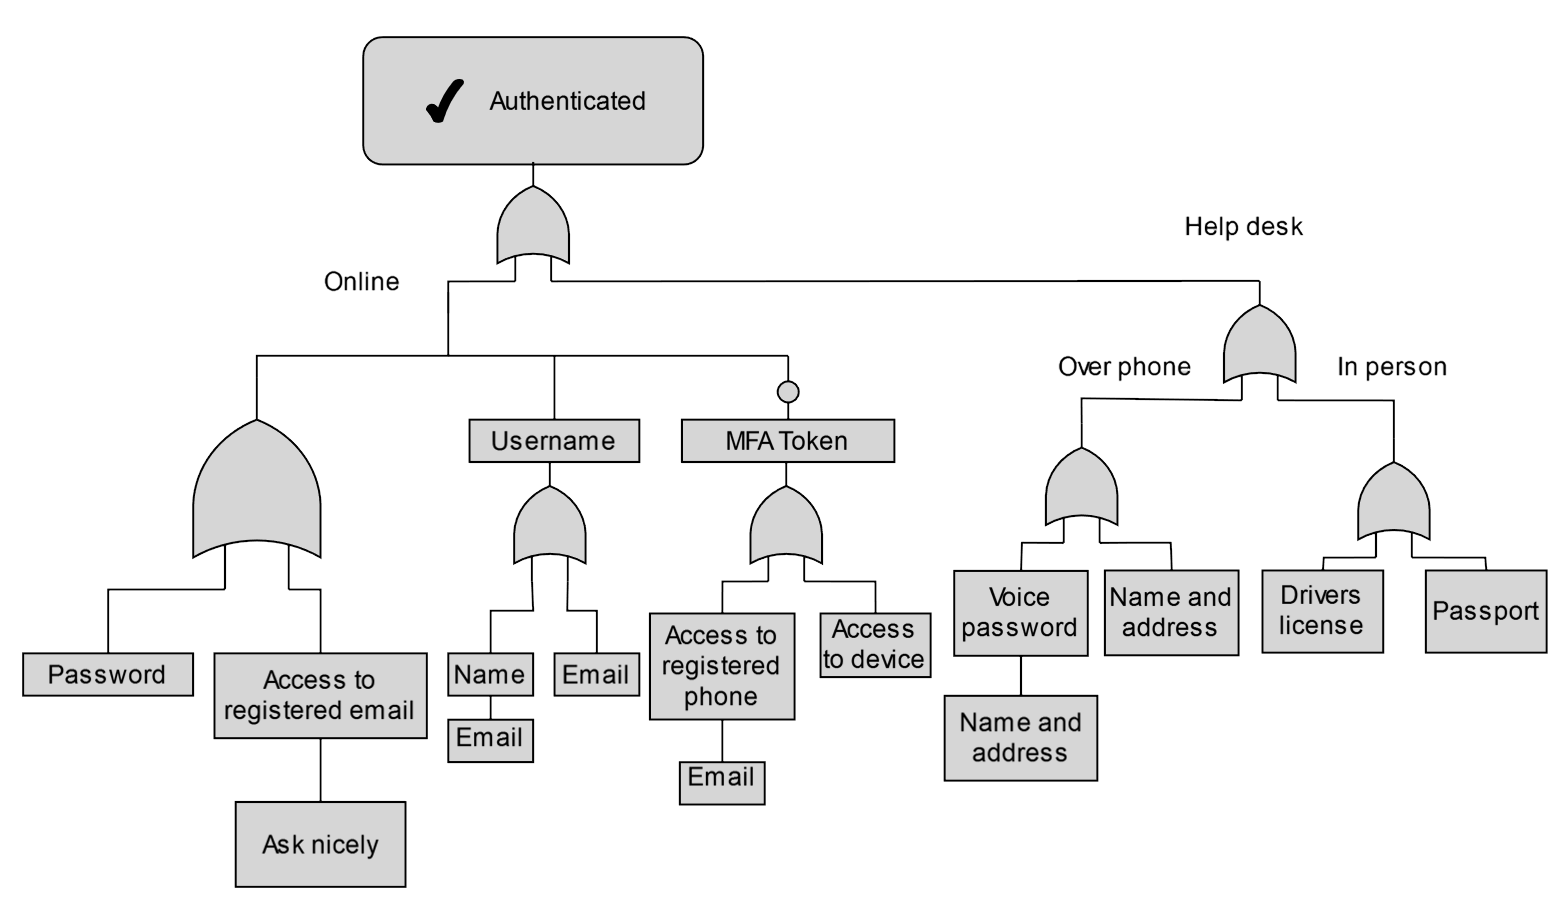 A more filled out picture of authentication requirements